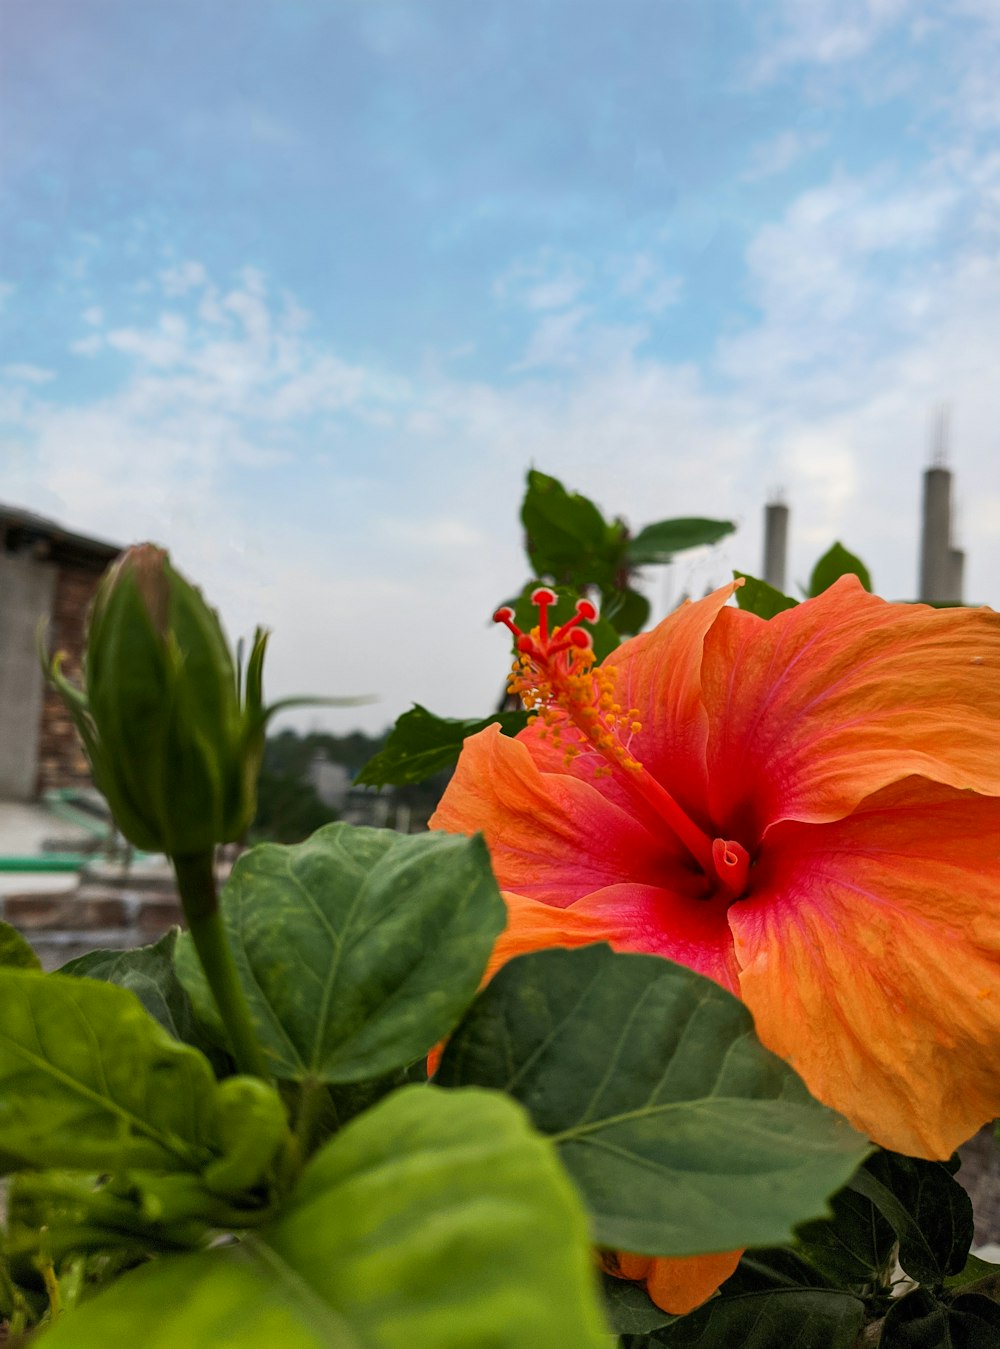 a bright orange flower with green leaves in the foreground